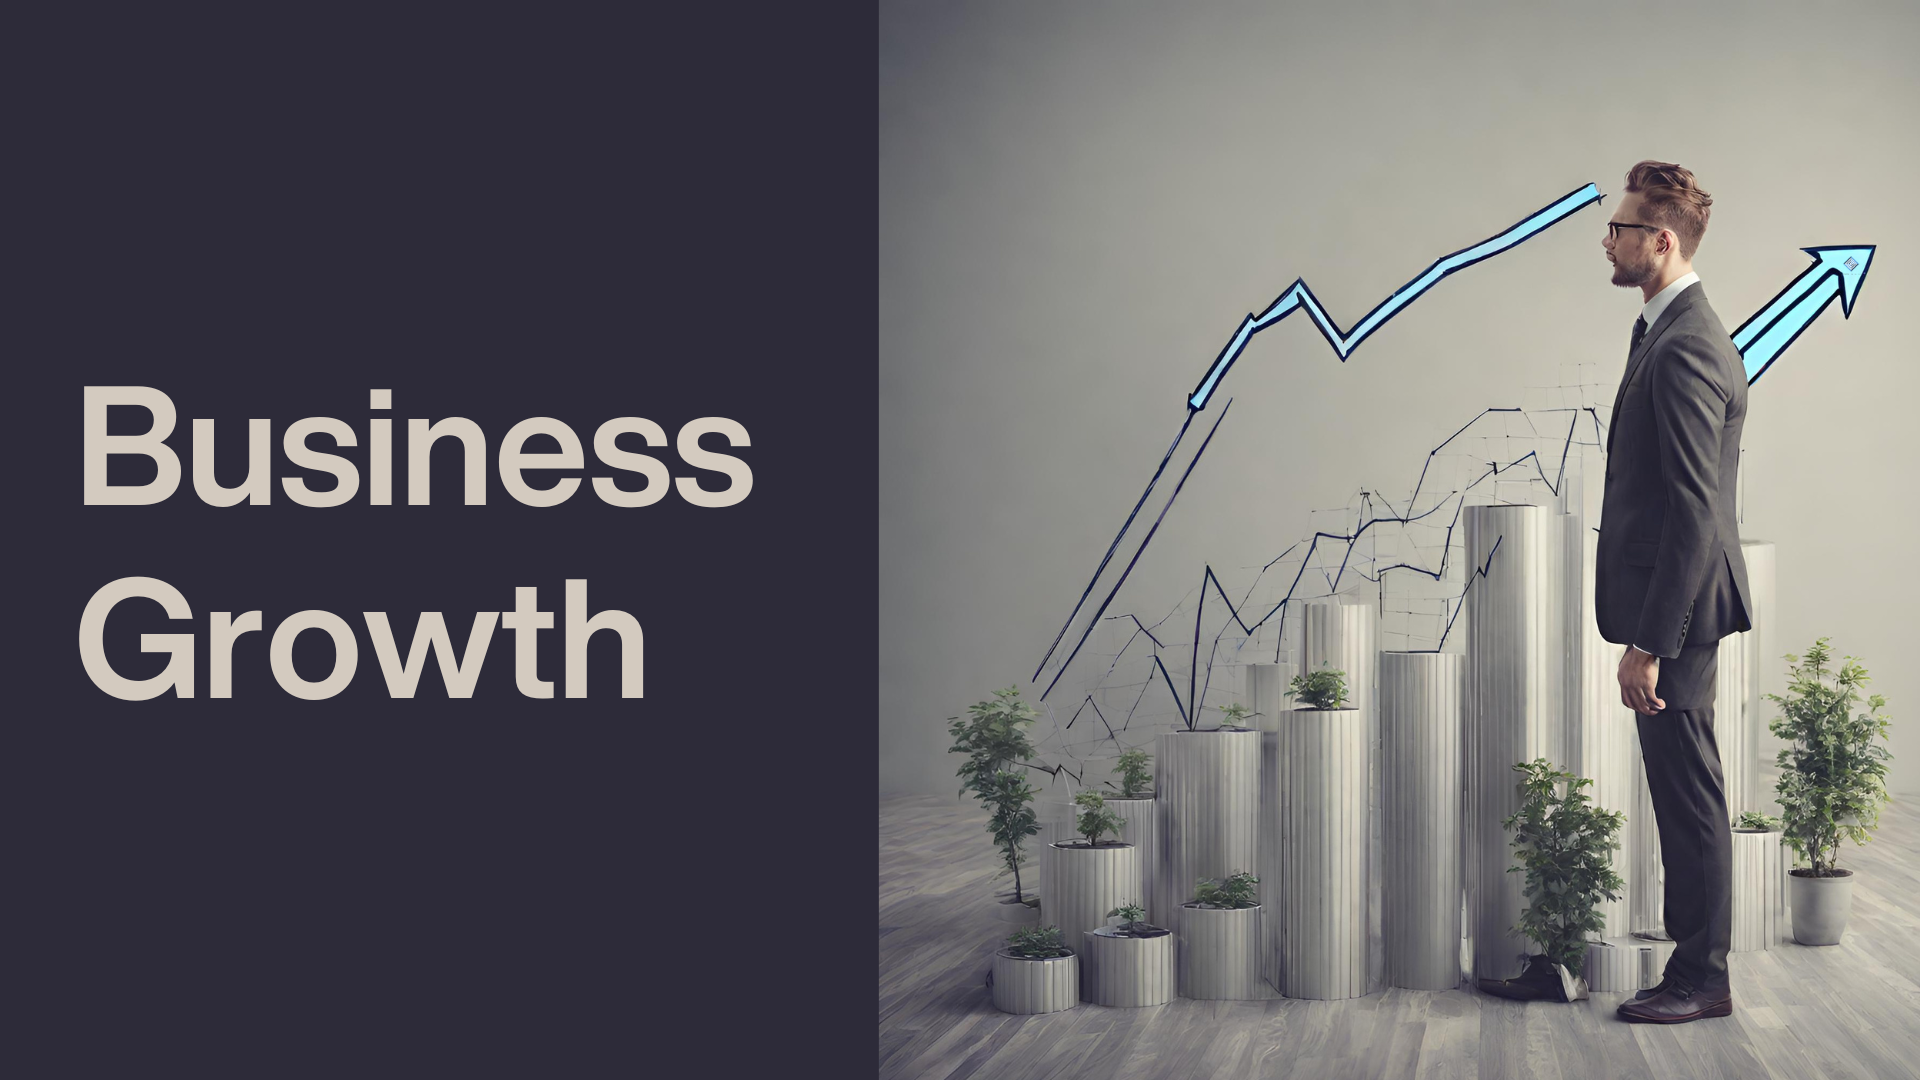 Alt text: A conceptual image of business growth with a man standing and looking at a bar graph comprising metallic cylinders of different heights symbolizing growth, some with potted plants. A blue upward arrow and line graph overlay the scene, with the words "Business Growth" prominently displayed on the left side of the image.